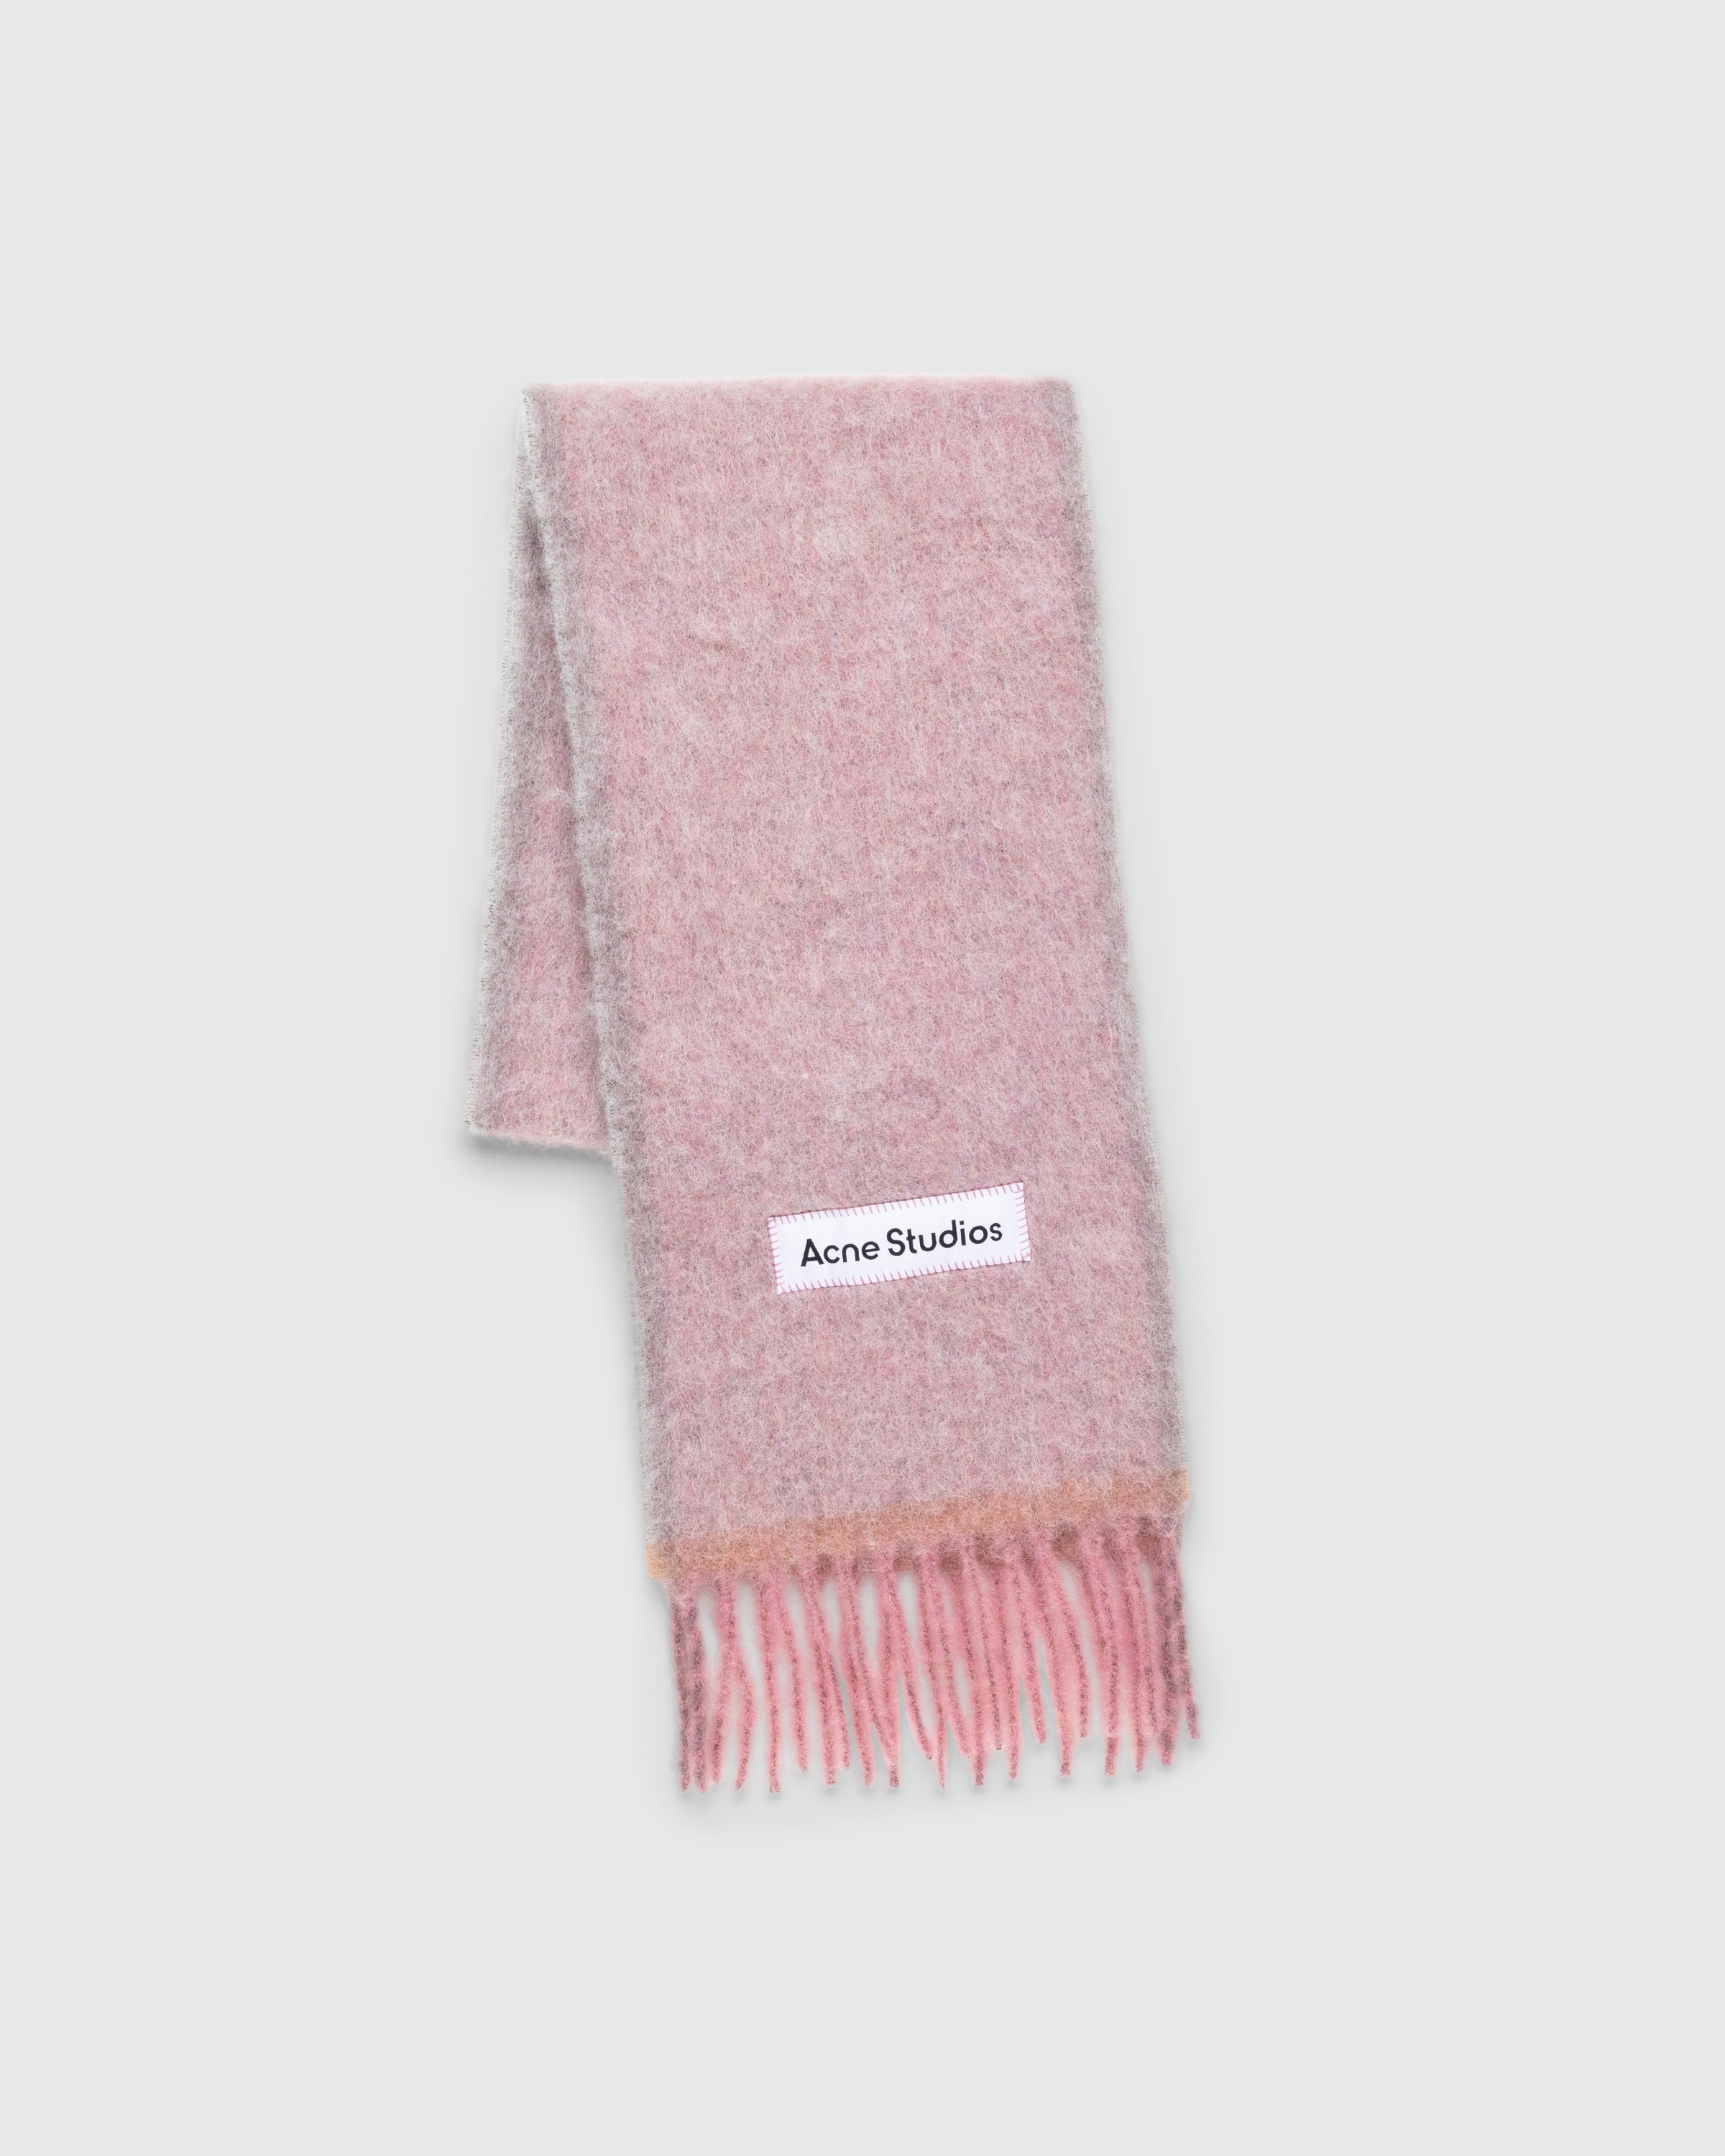 Acne Studios - Mohair Wool Fringe Scarf Lavender - Accessories - Pink - Image 2